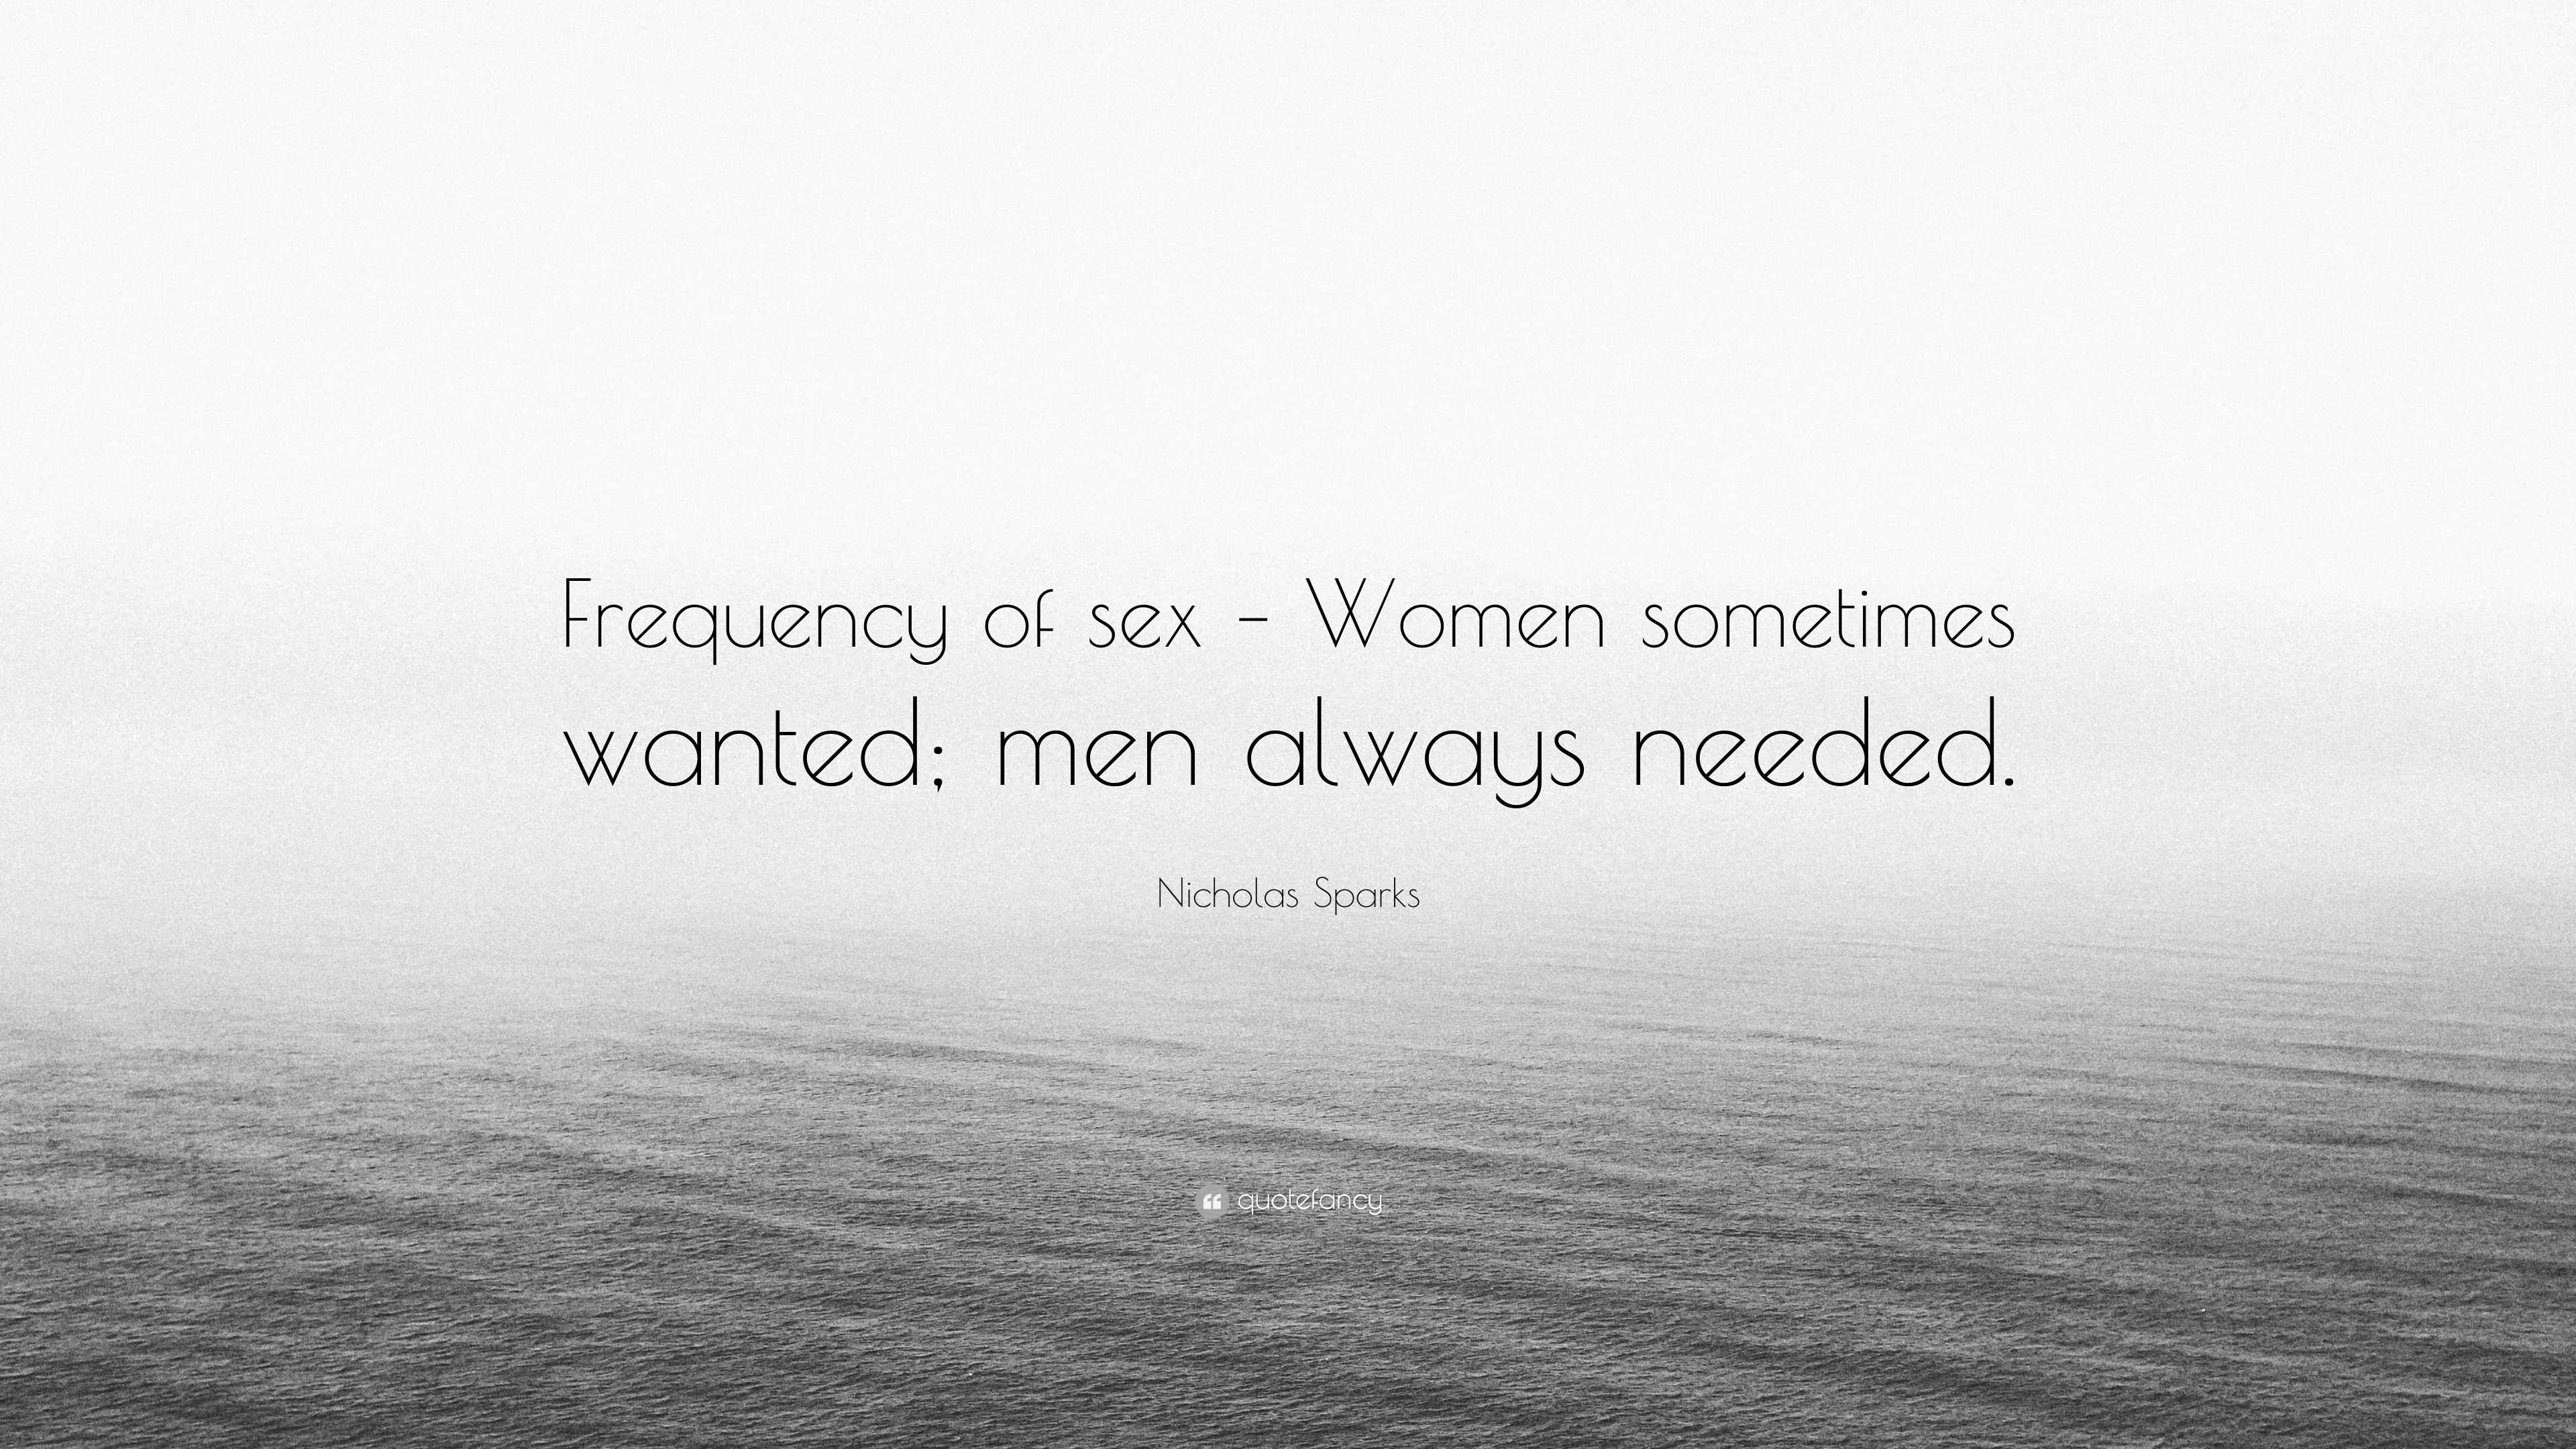 Nicholas Sparks Quote “frequency Of Sex Women Sometimes Wanted Men Always Needed” 5524